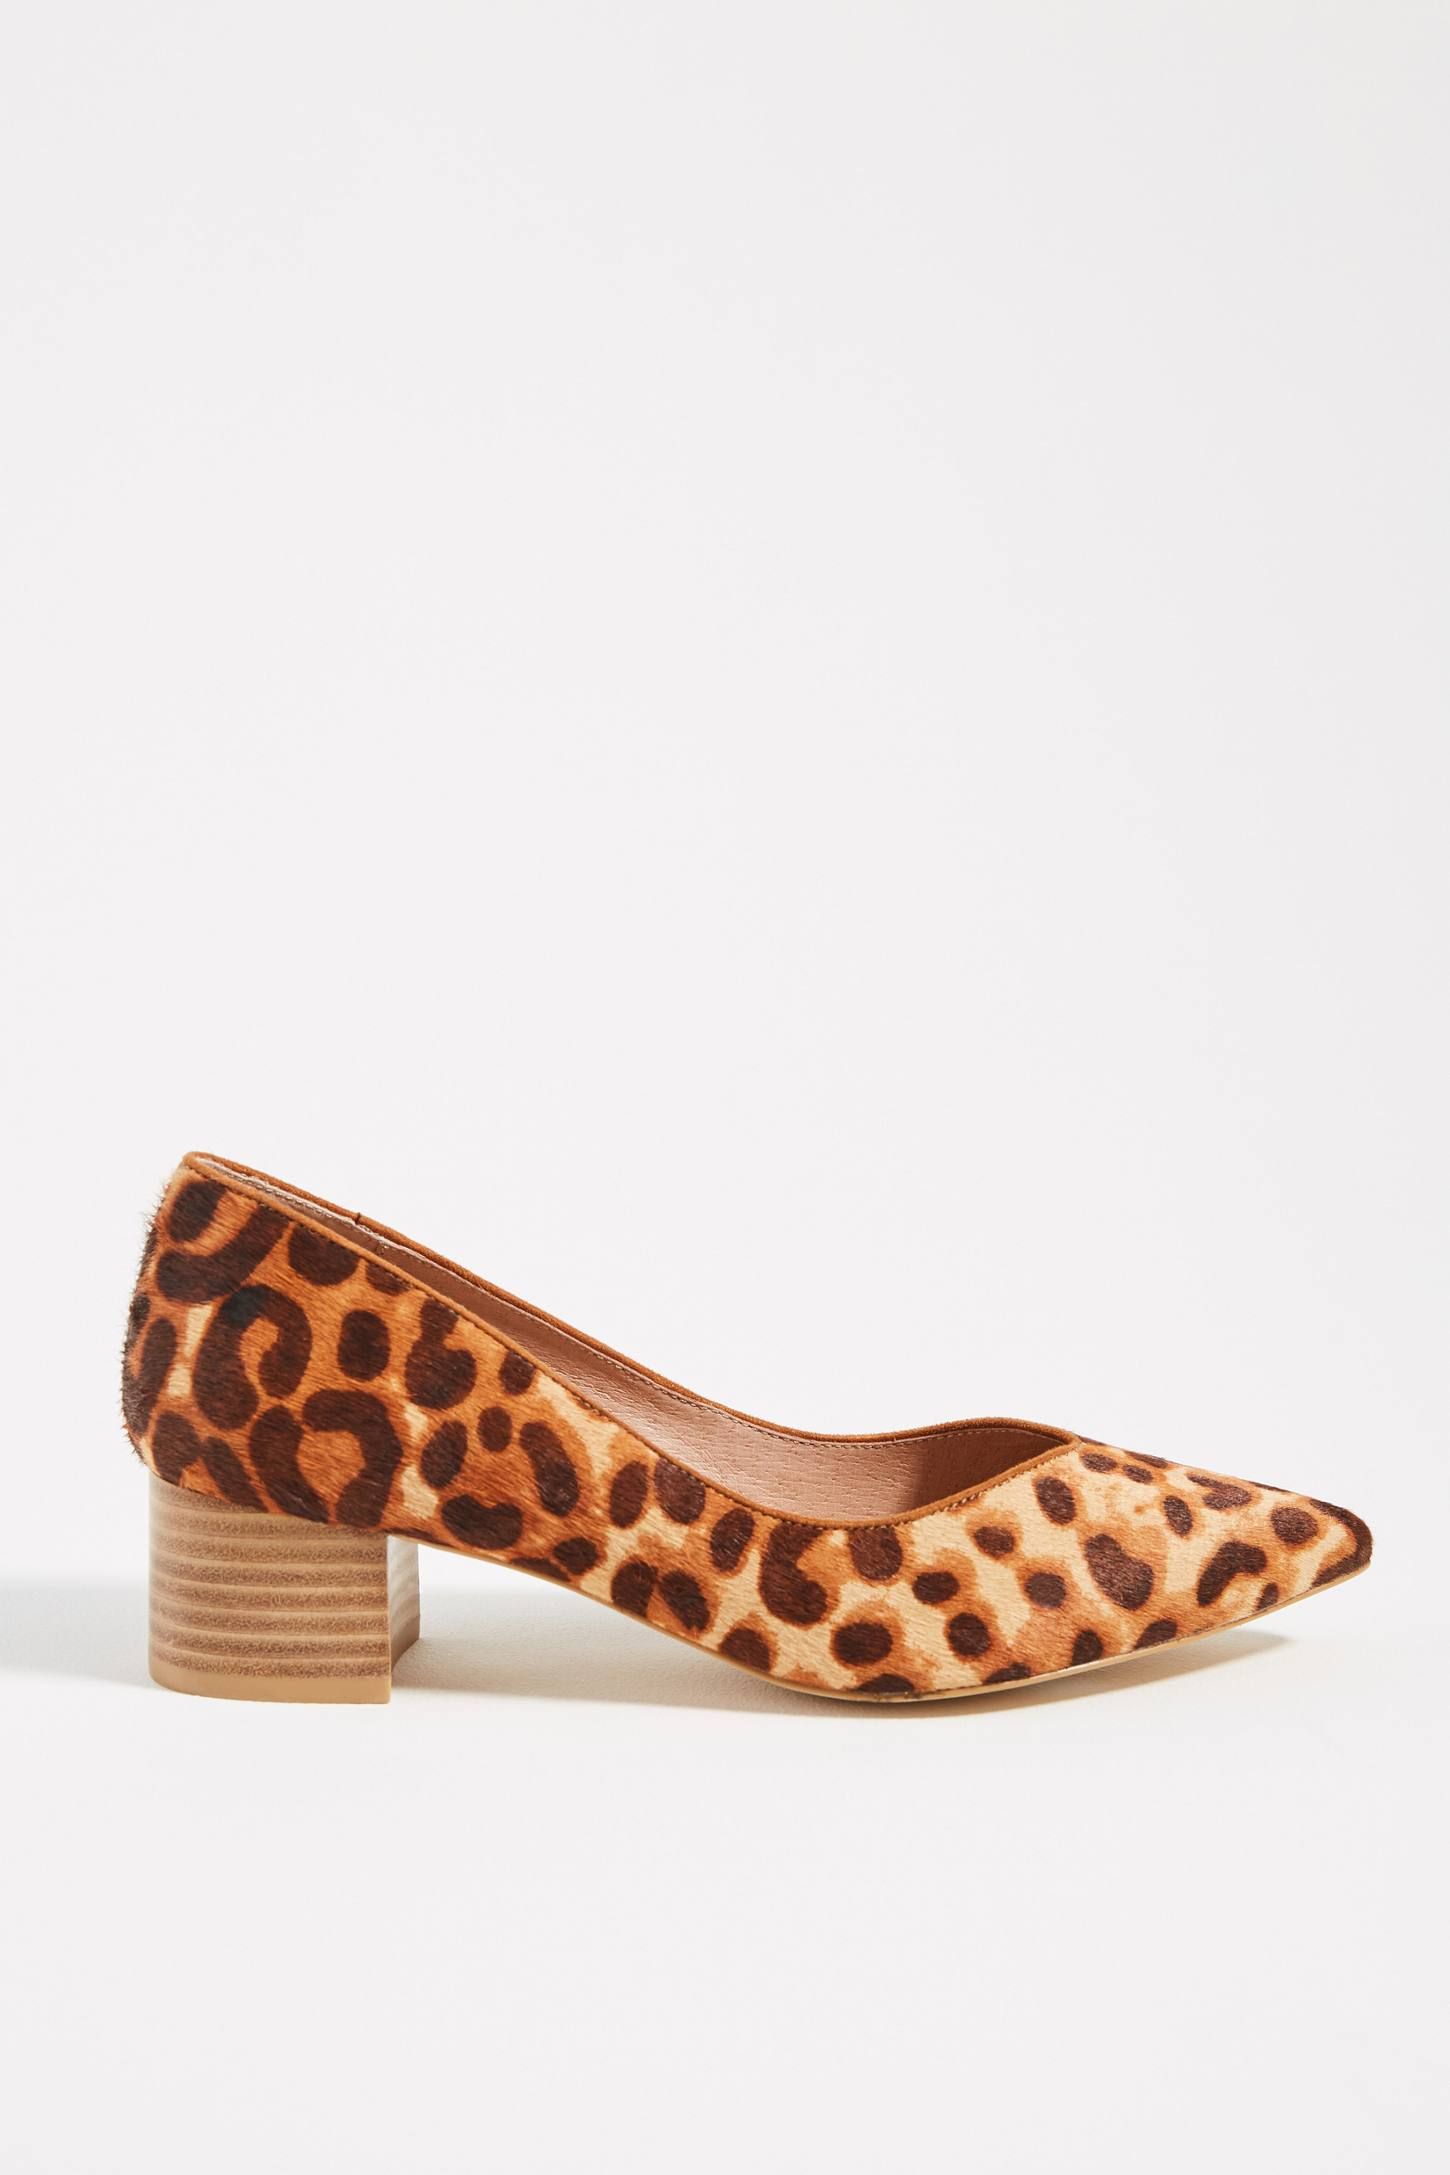 Sale > anthropologie sale shoes > is stock